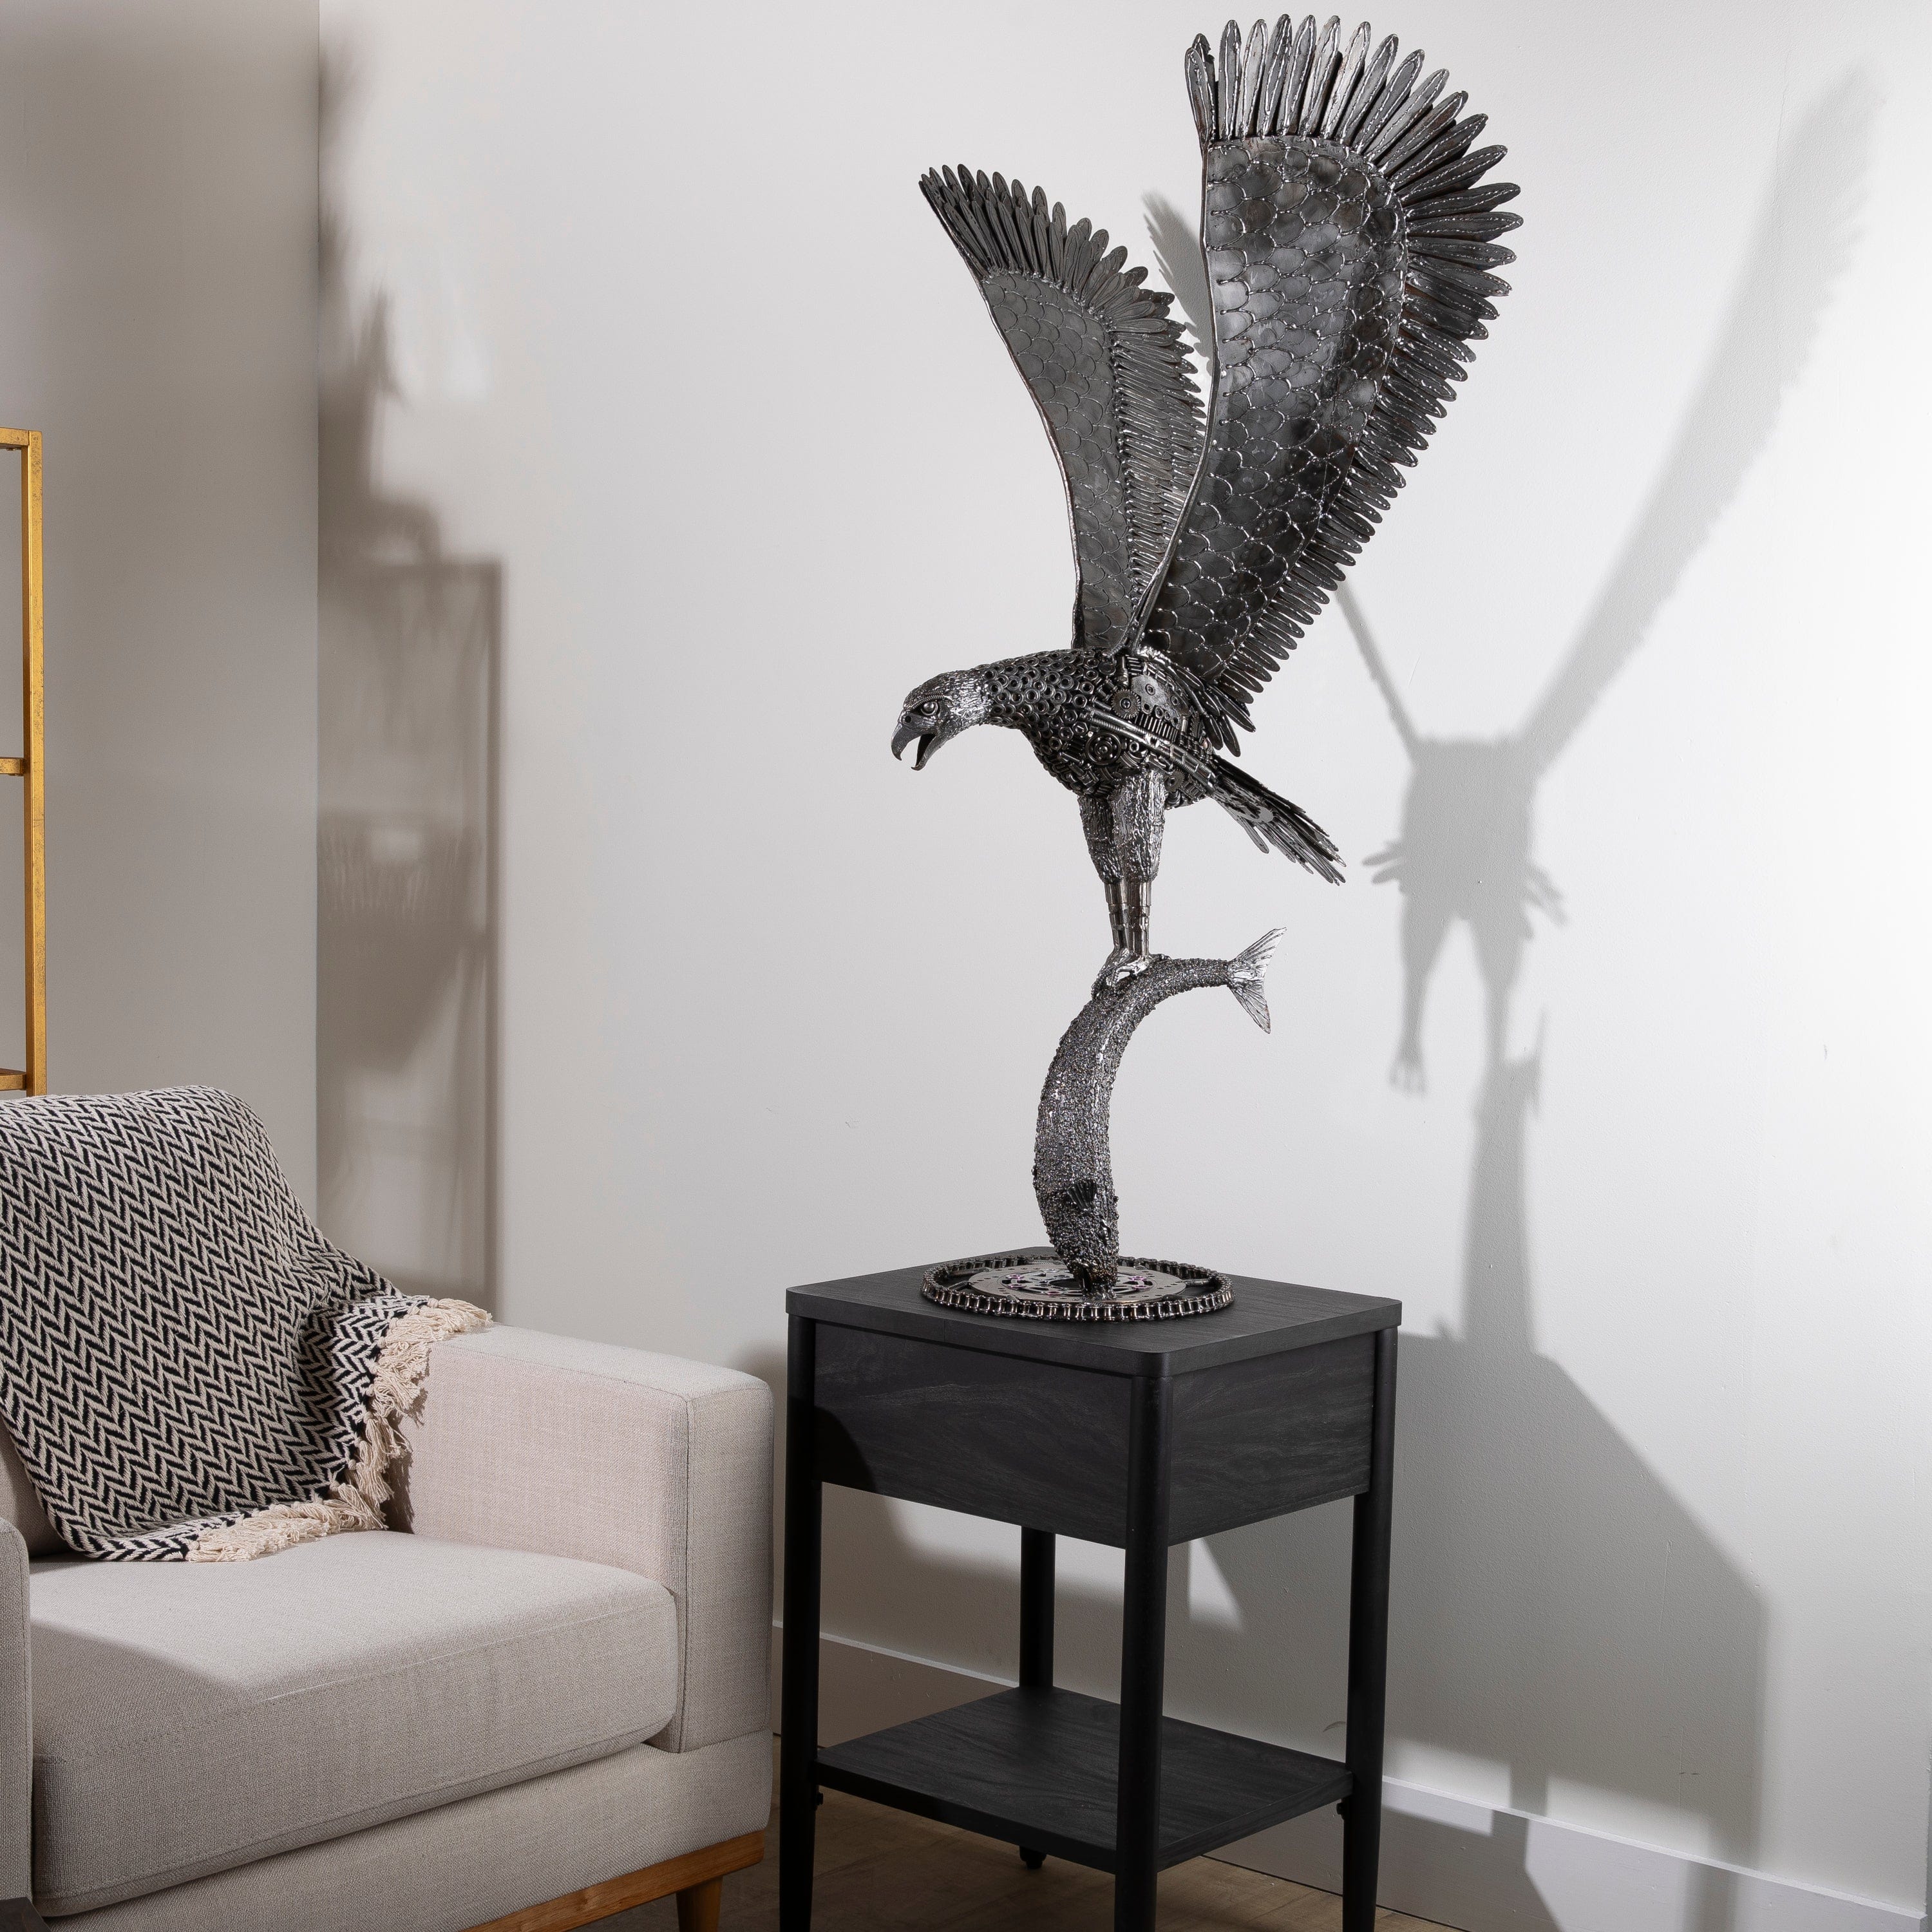 KALIFANO Recycled Metal Art 47" Eagle on the Hunt Recycled Metal Art Sculpture RMS-EAG54x120-PK